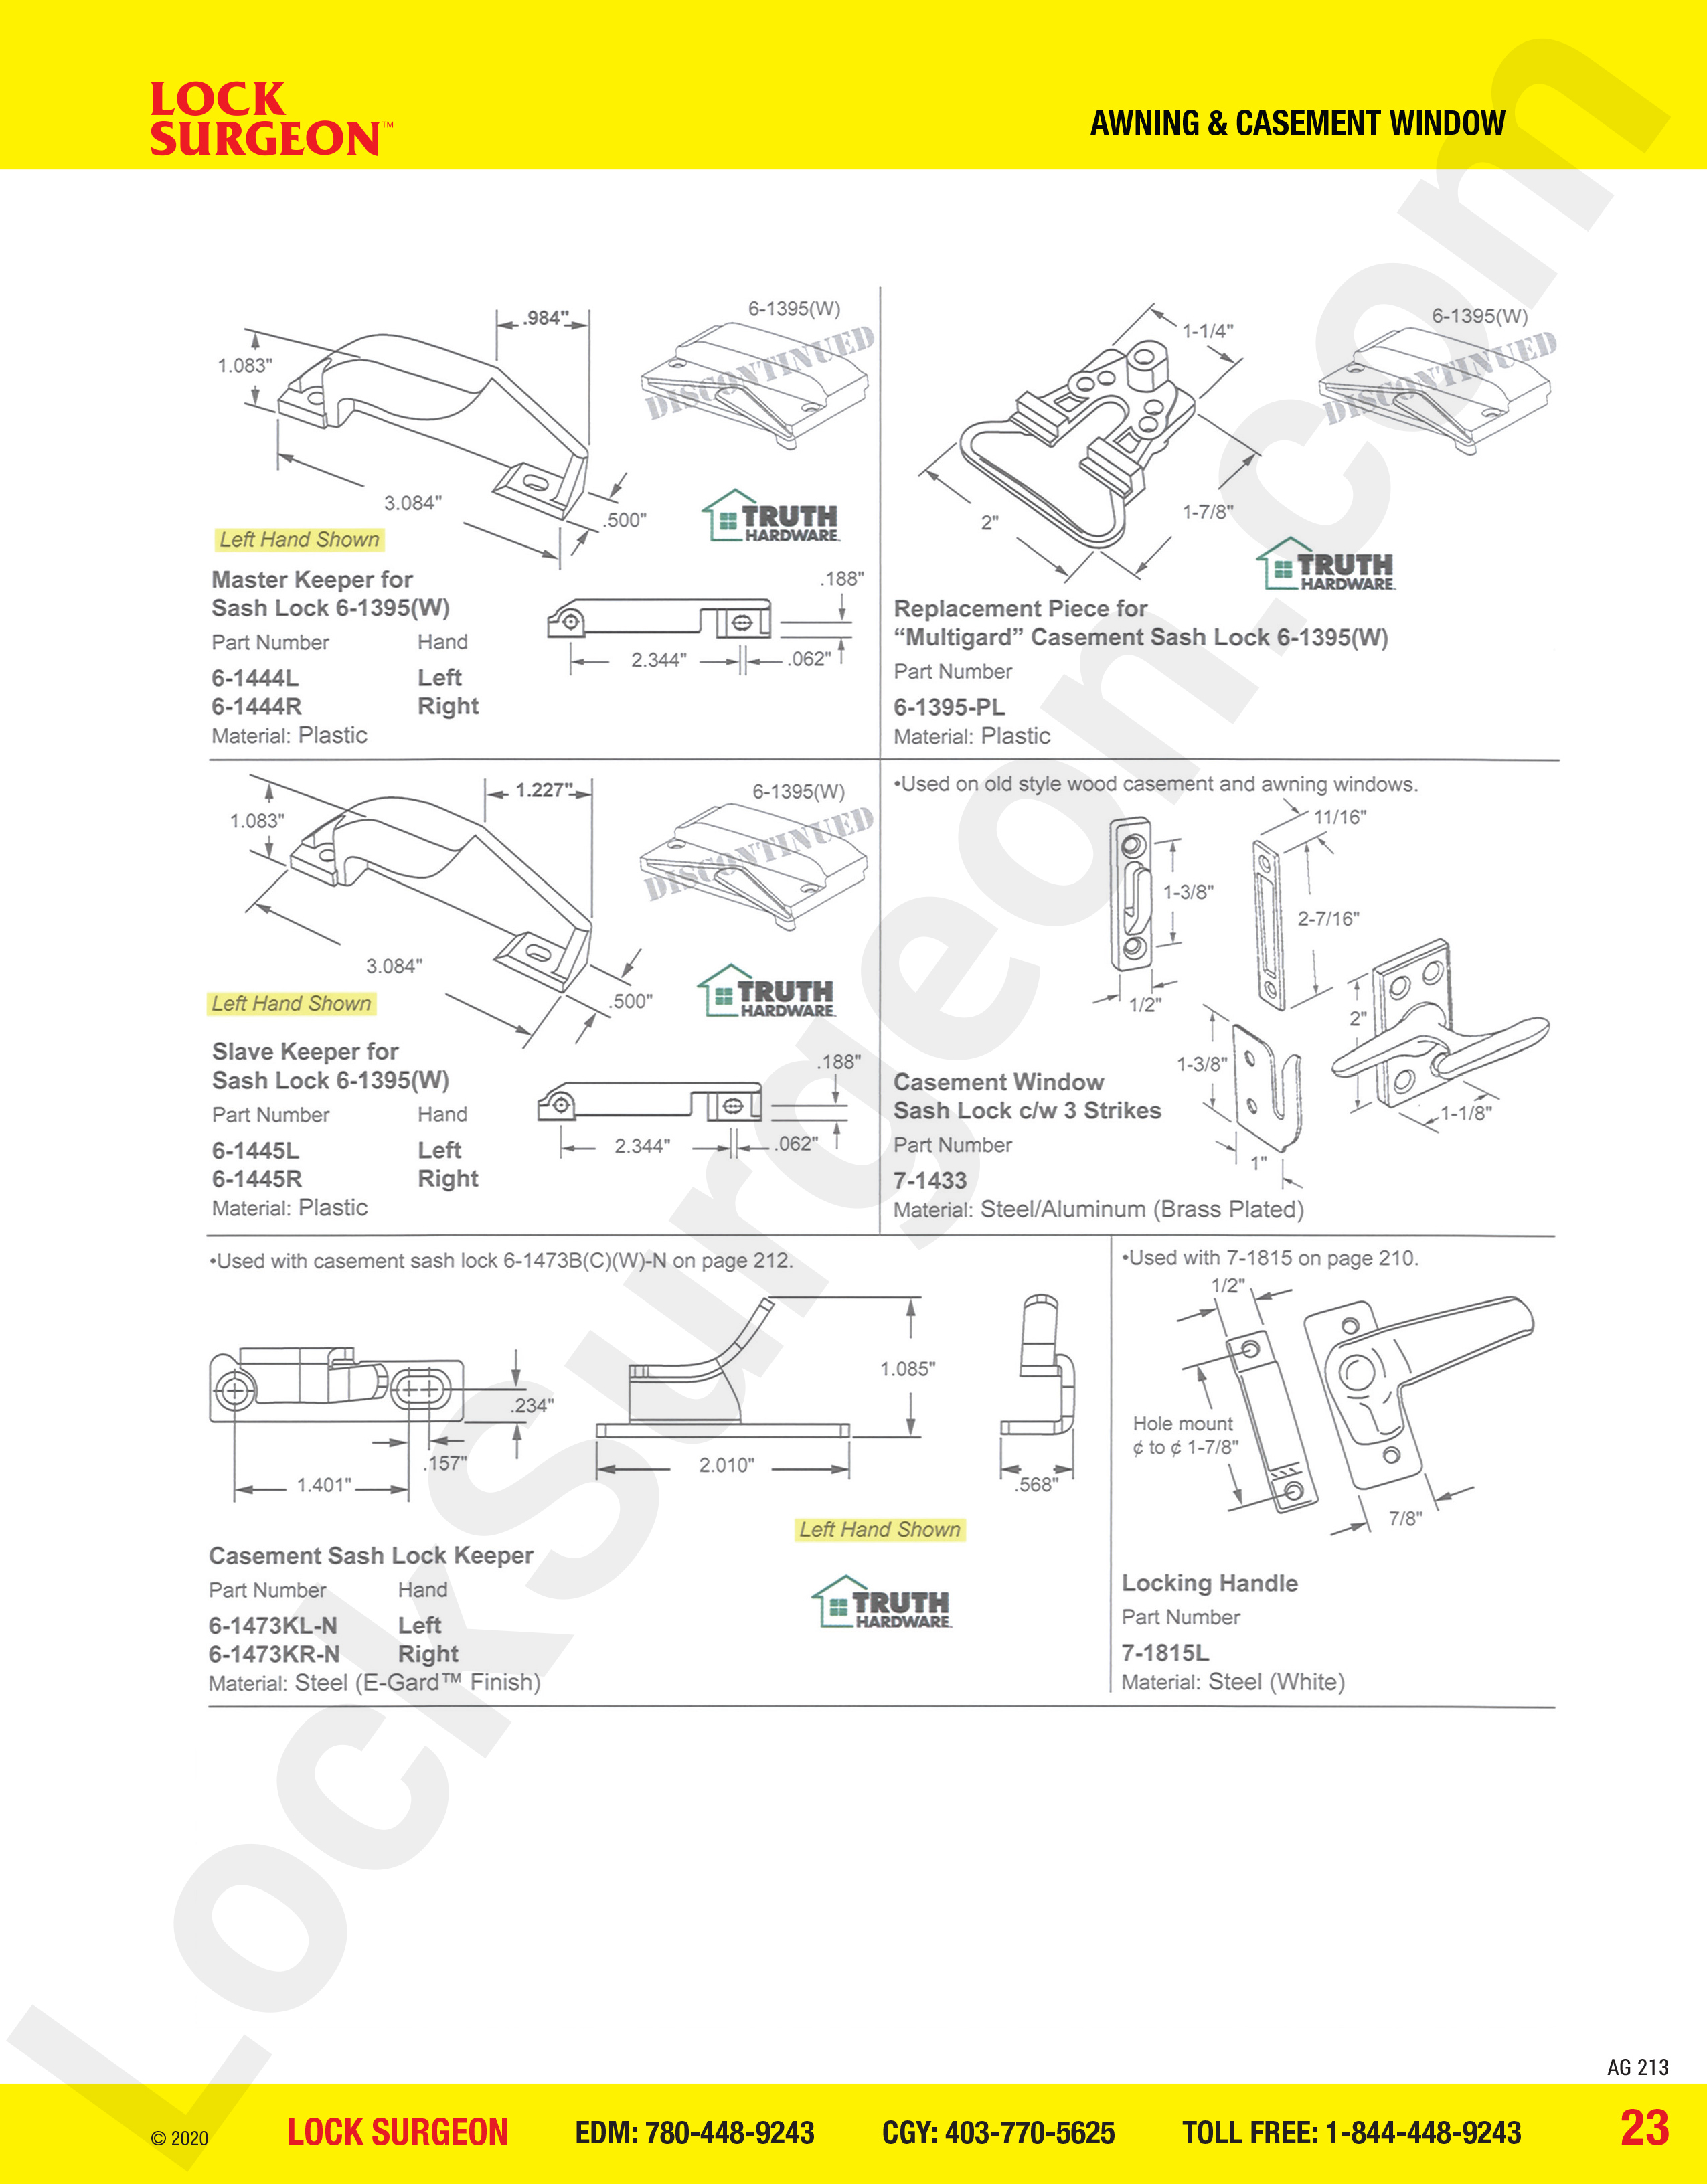 awning and casement window parts for sash locks, master keeper for sash locks, 3-strike sash locks.